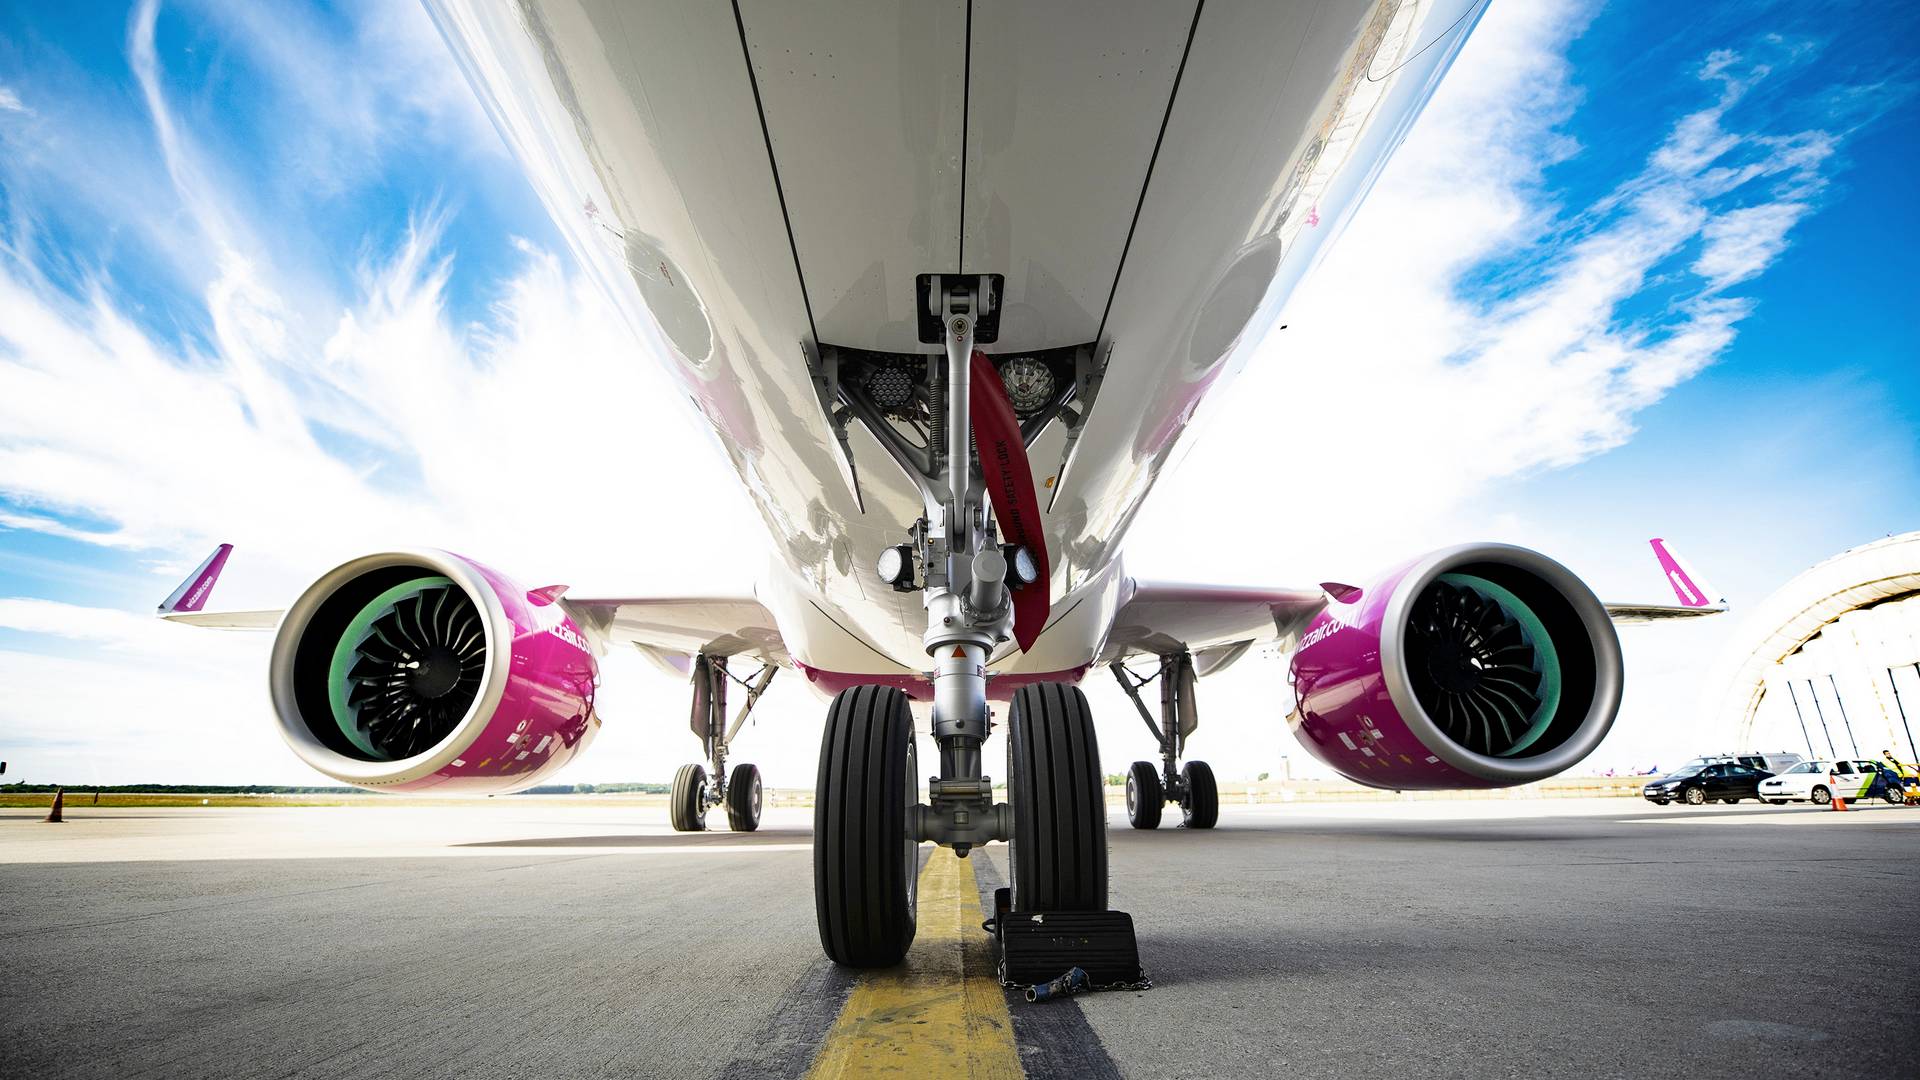 Wizz Air Orders More Airbus A321neo Narrowbodies